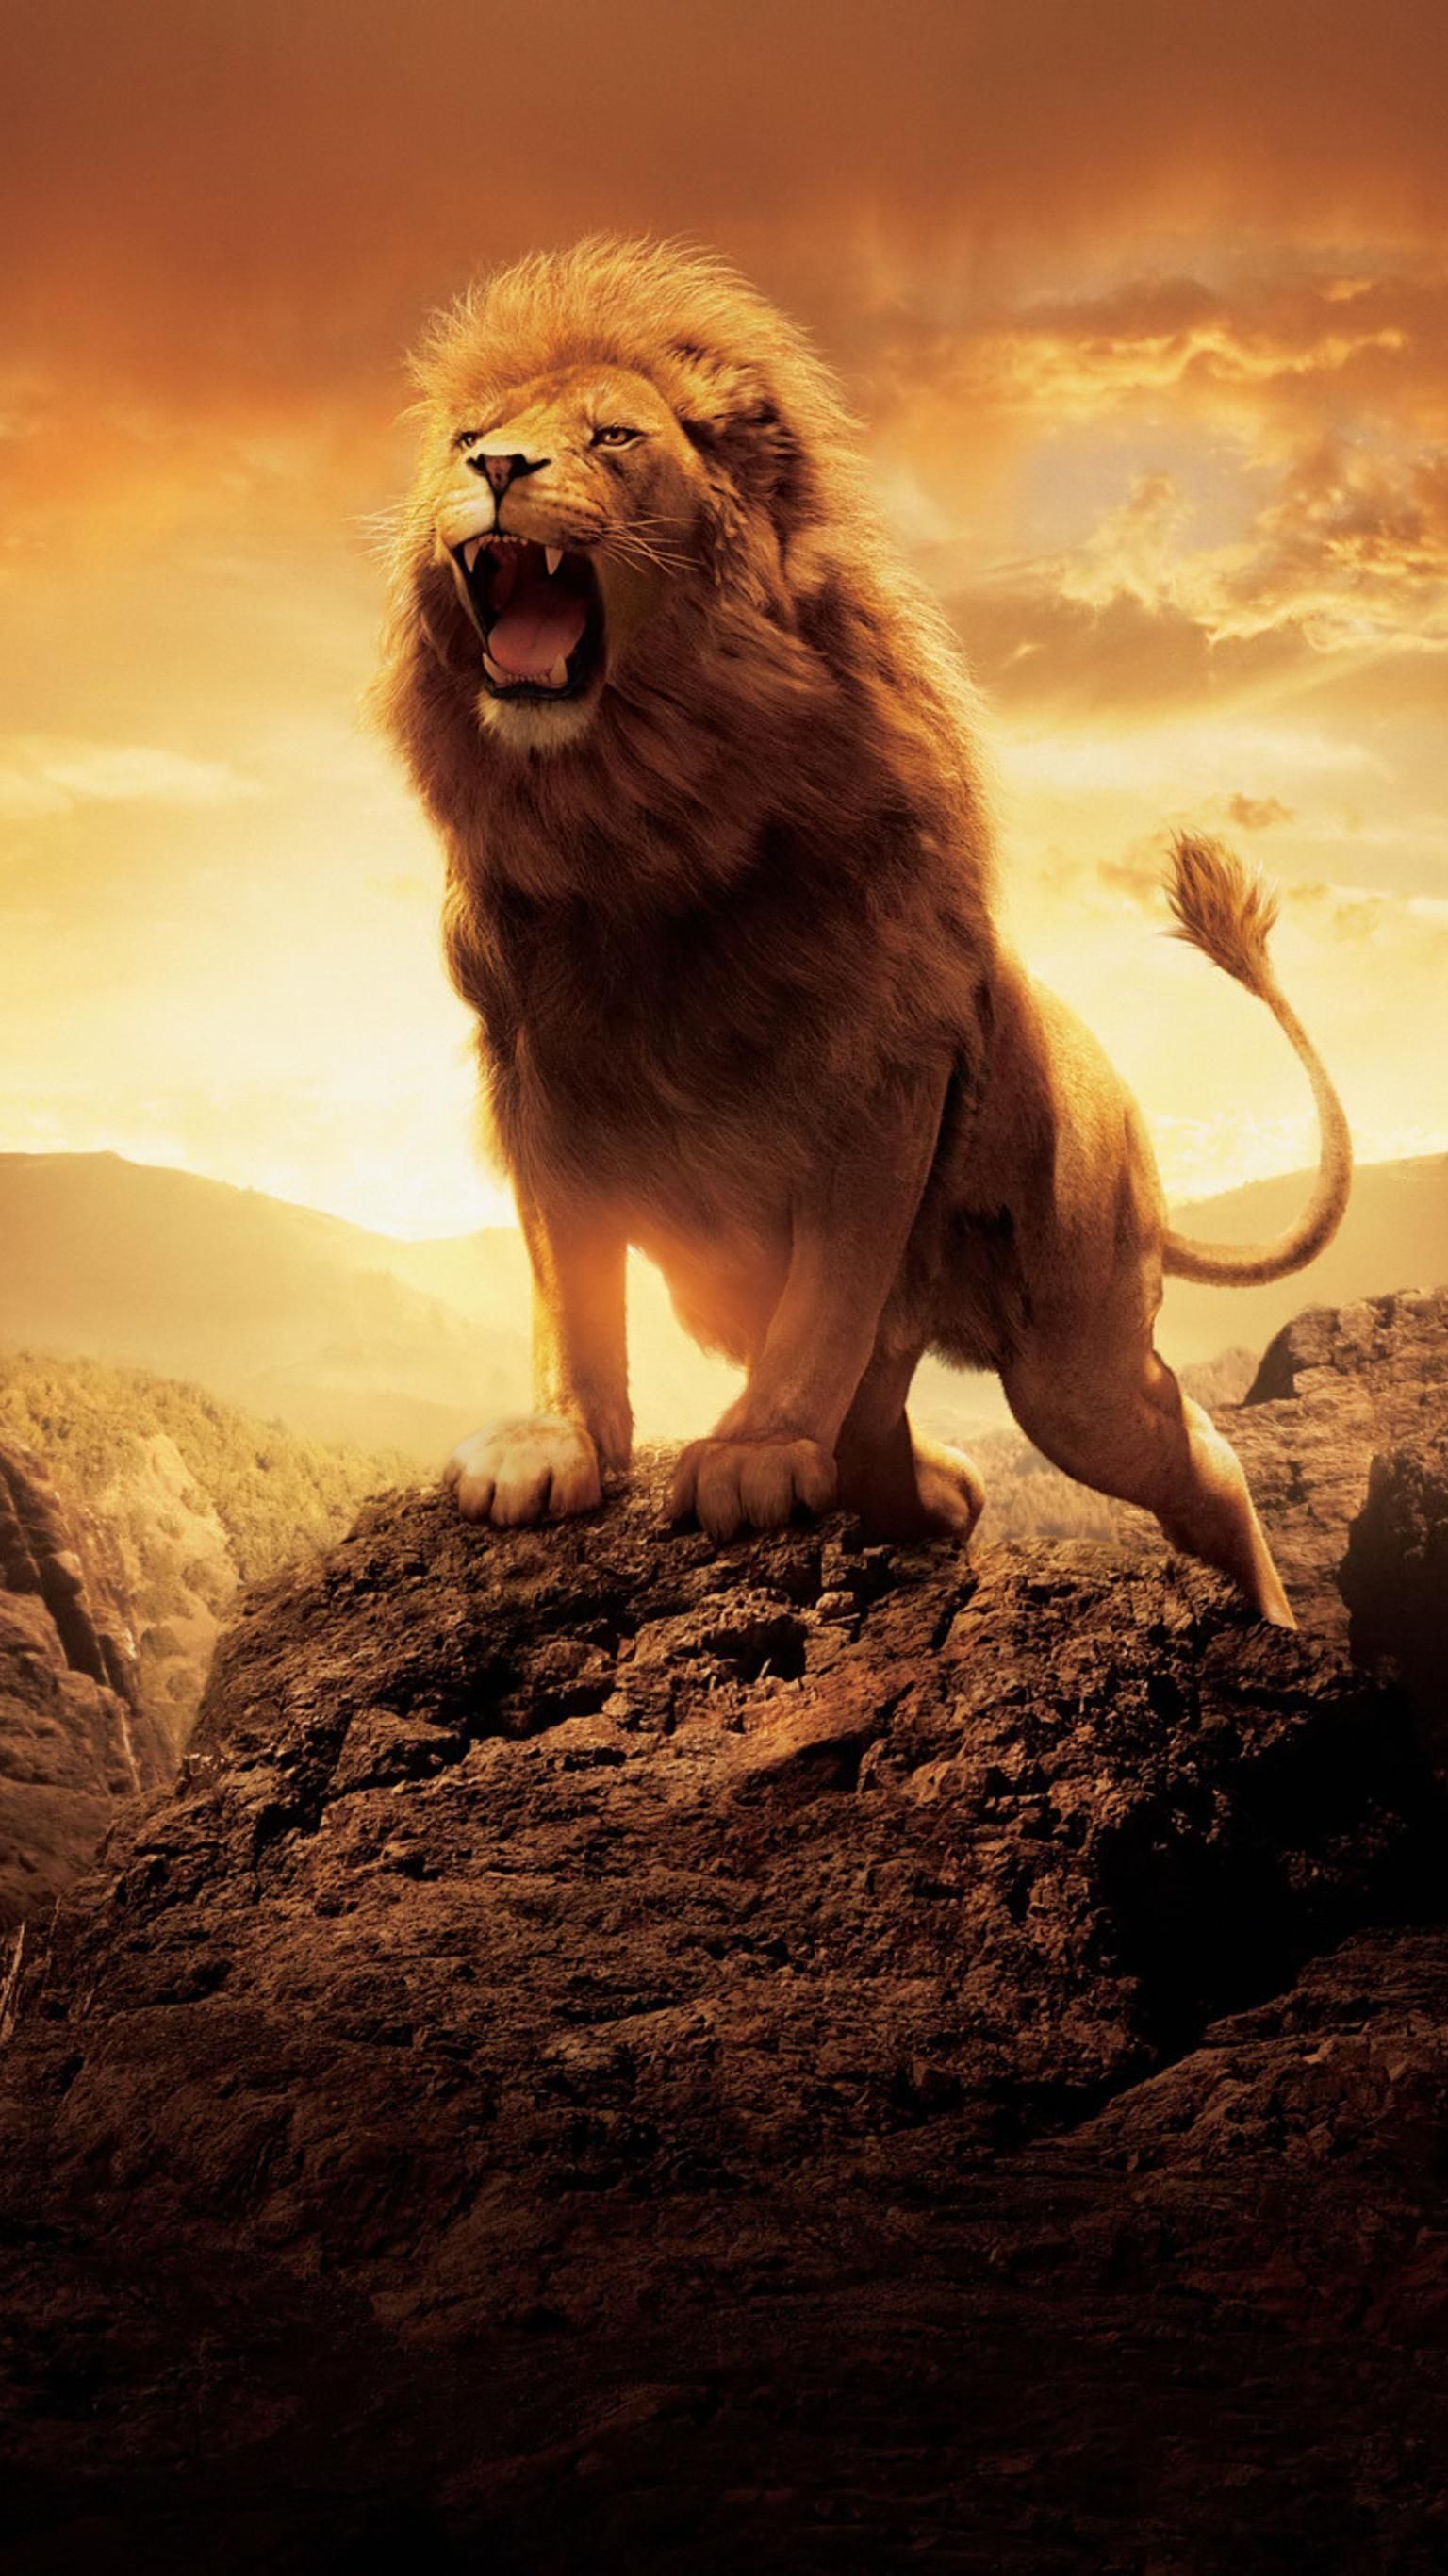 Moviemania High Resolution Movie Wallpaper. Lion Image, Lion Picture, Narnia Lion